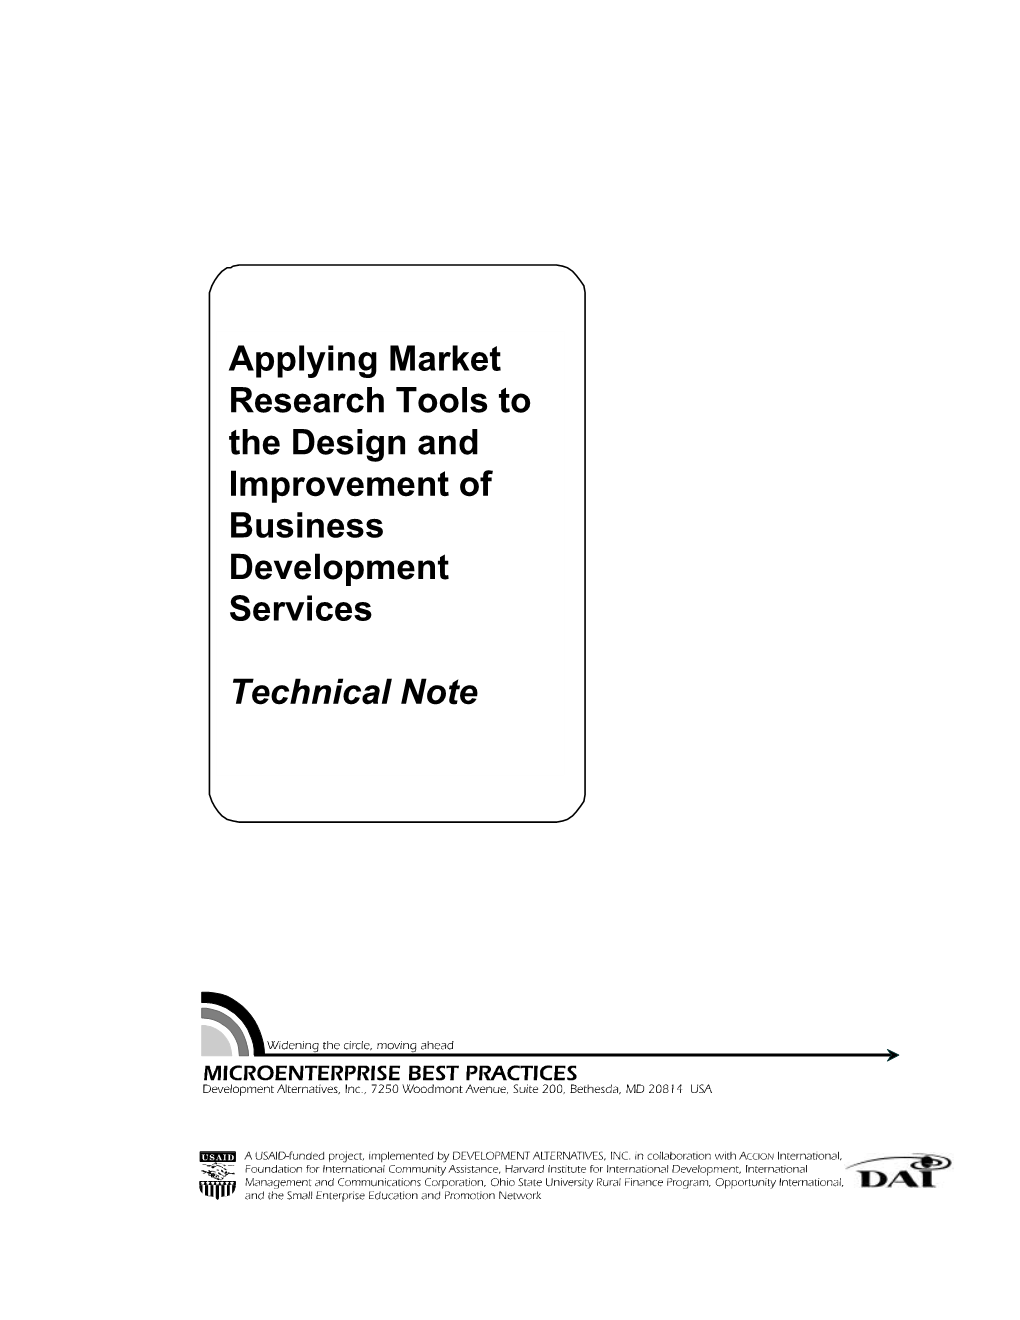 Applying Market Research Tools to the Design and Improvement of Business Development Services